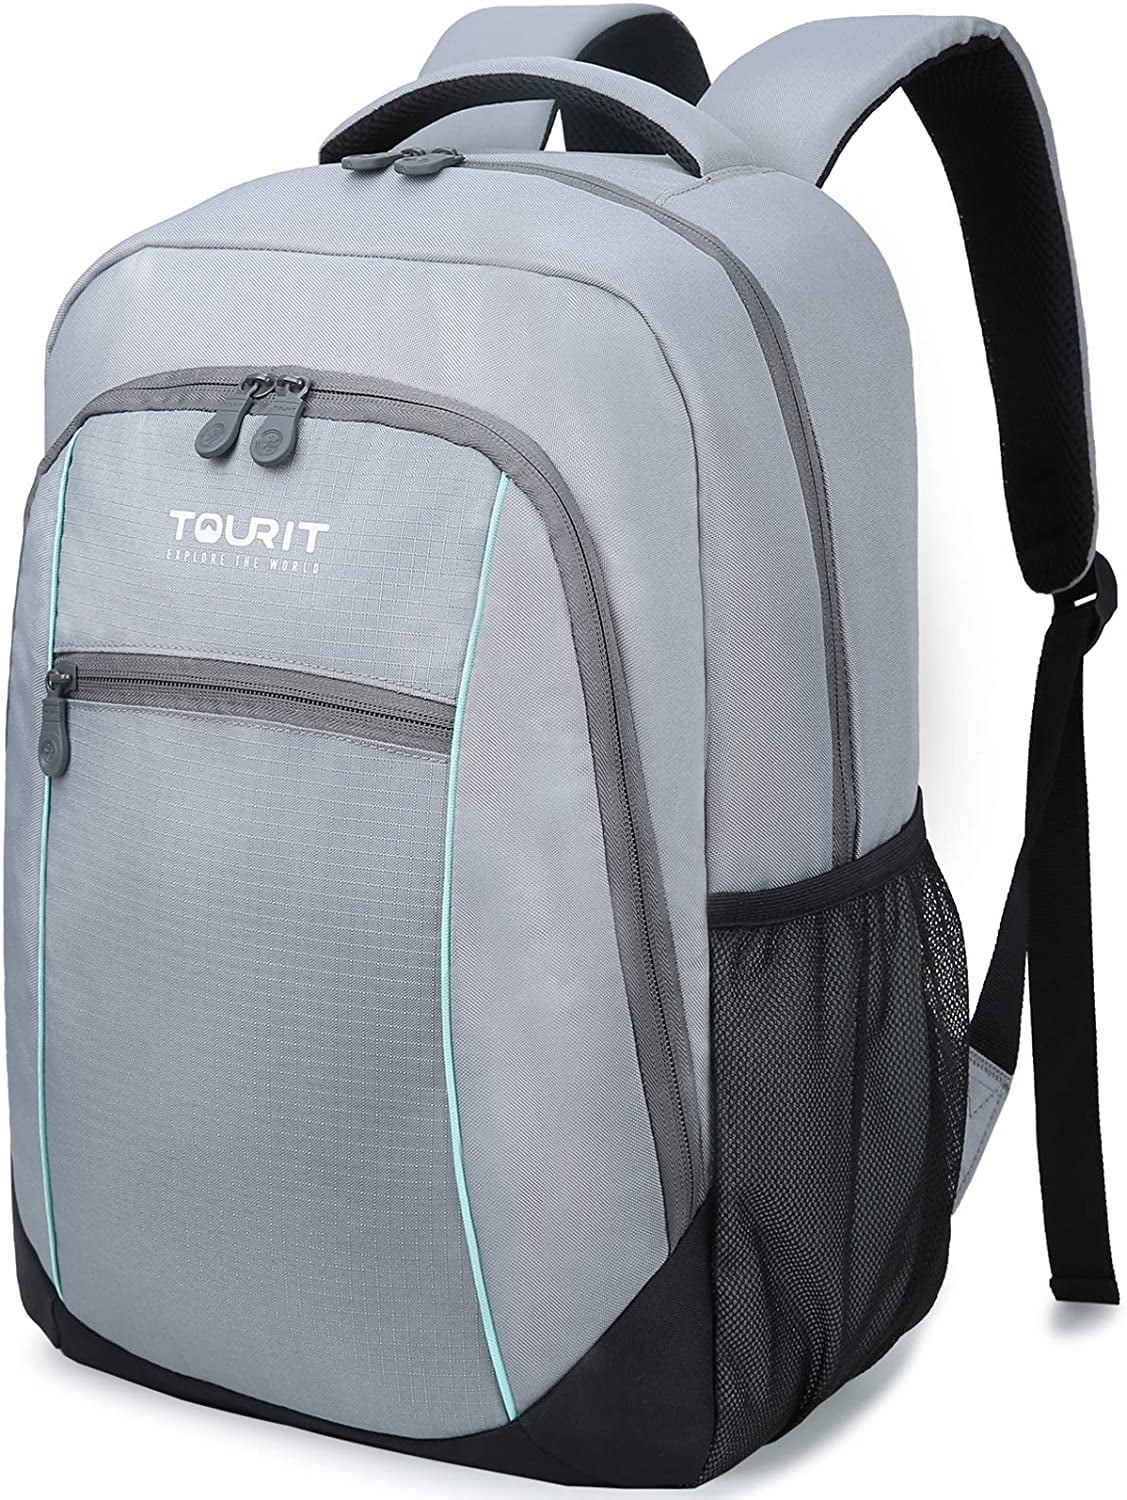 TOURIT Cooler Backpack 32 Cans Large Capacity Insulated Backpack Cooler Bag for 